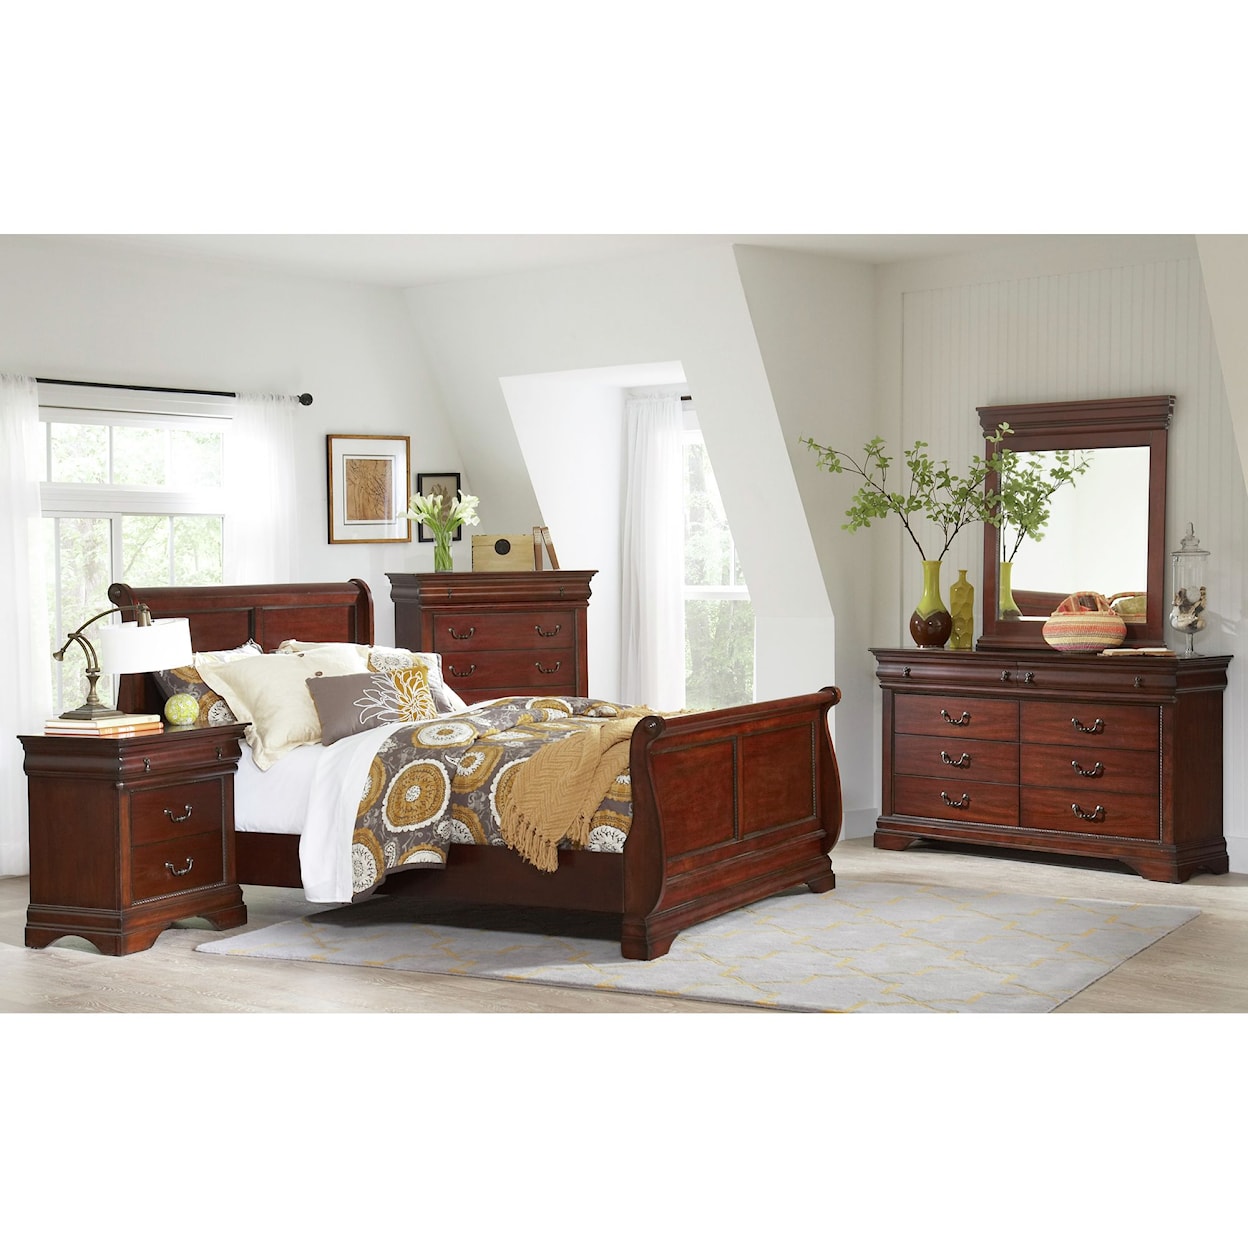 Elements International Chateau King Bedroom Group